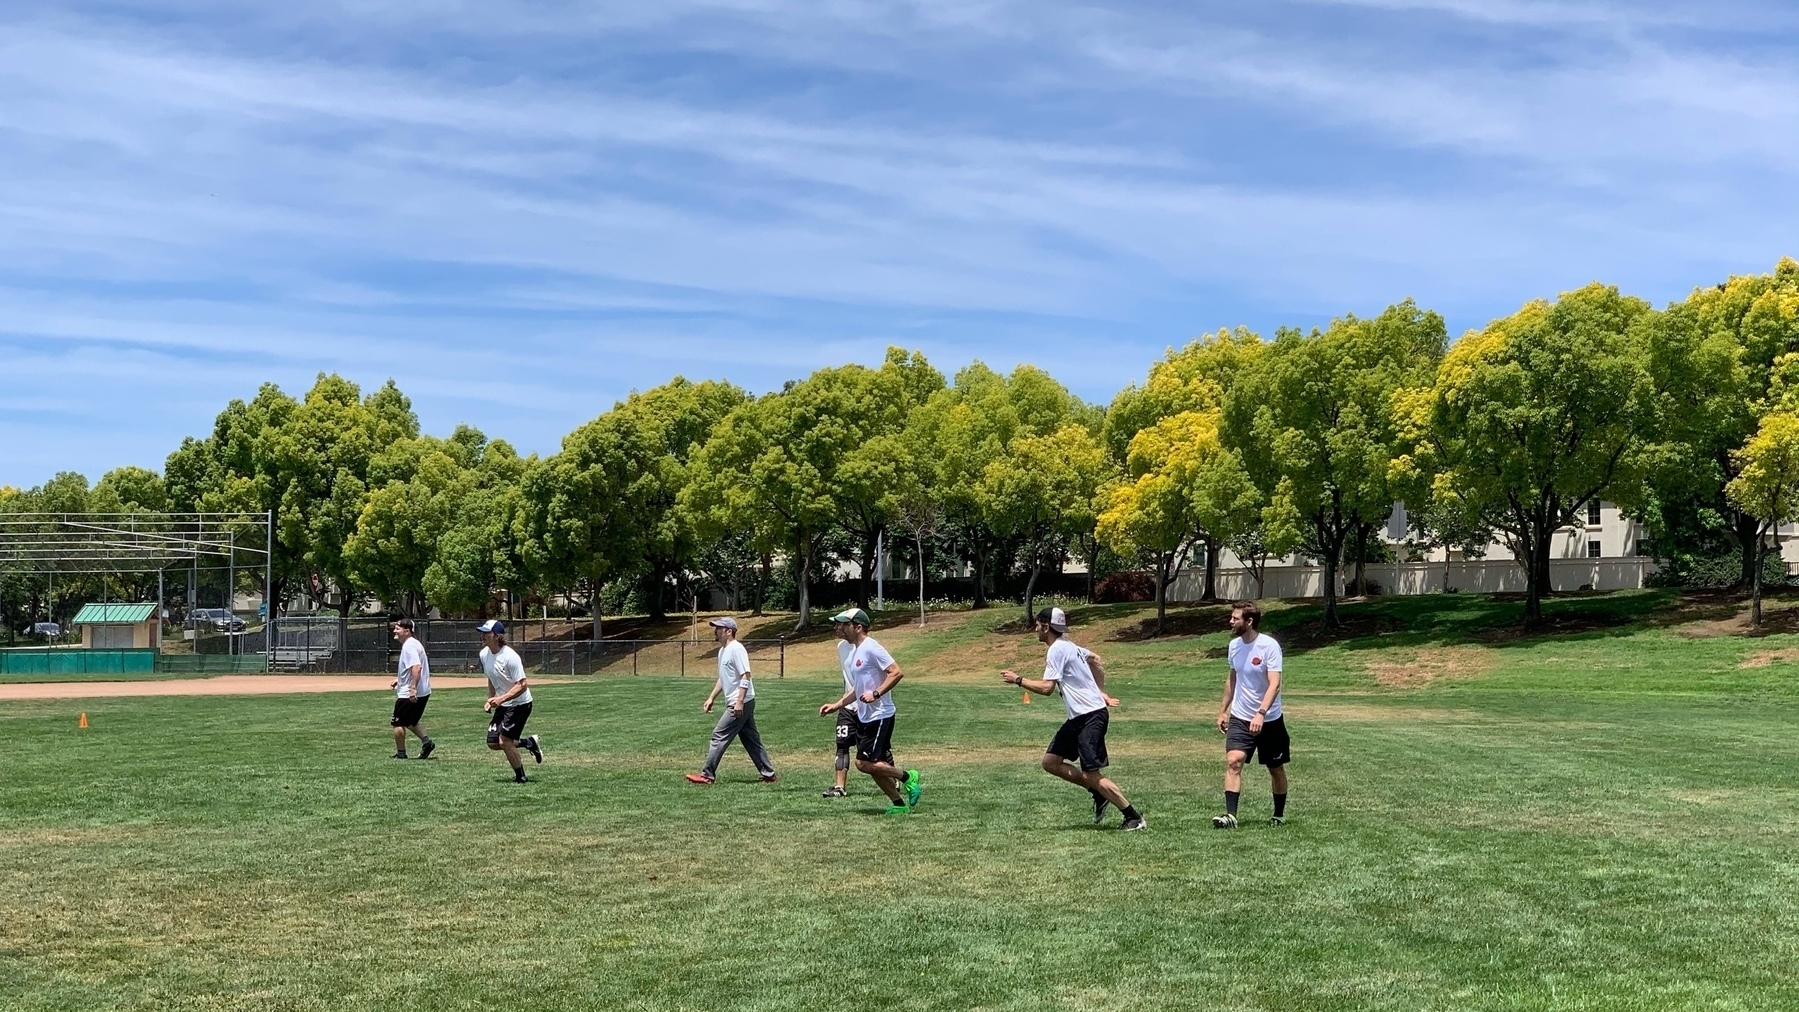 seven players on an ultimate field, first steps after the pull